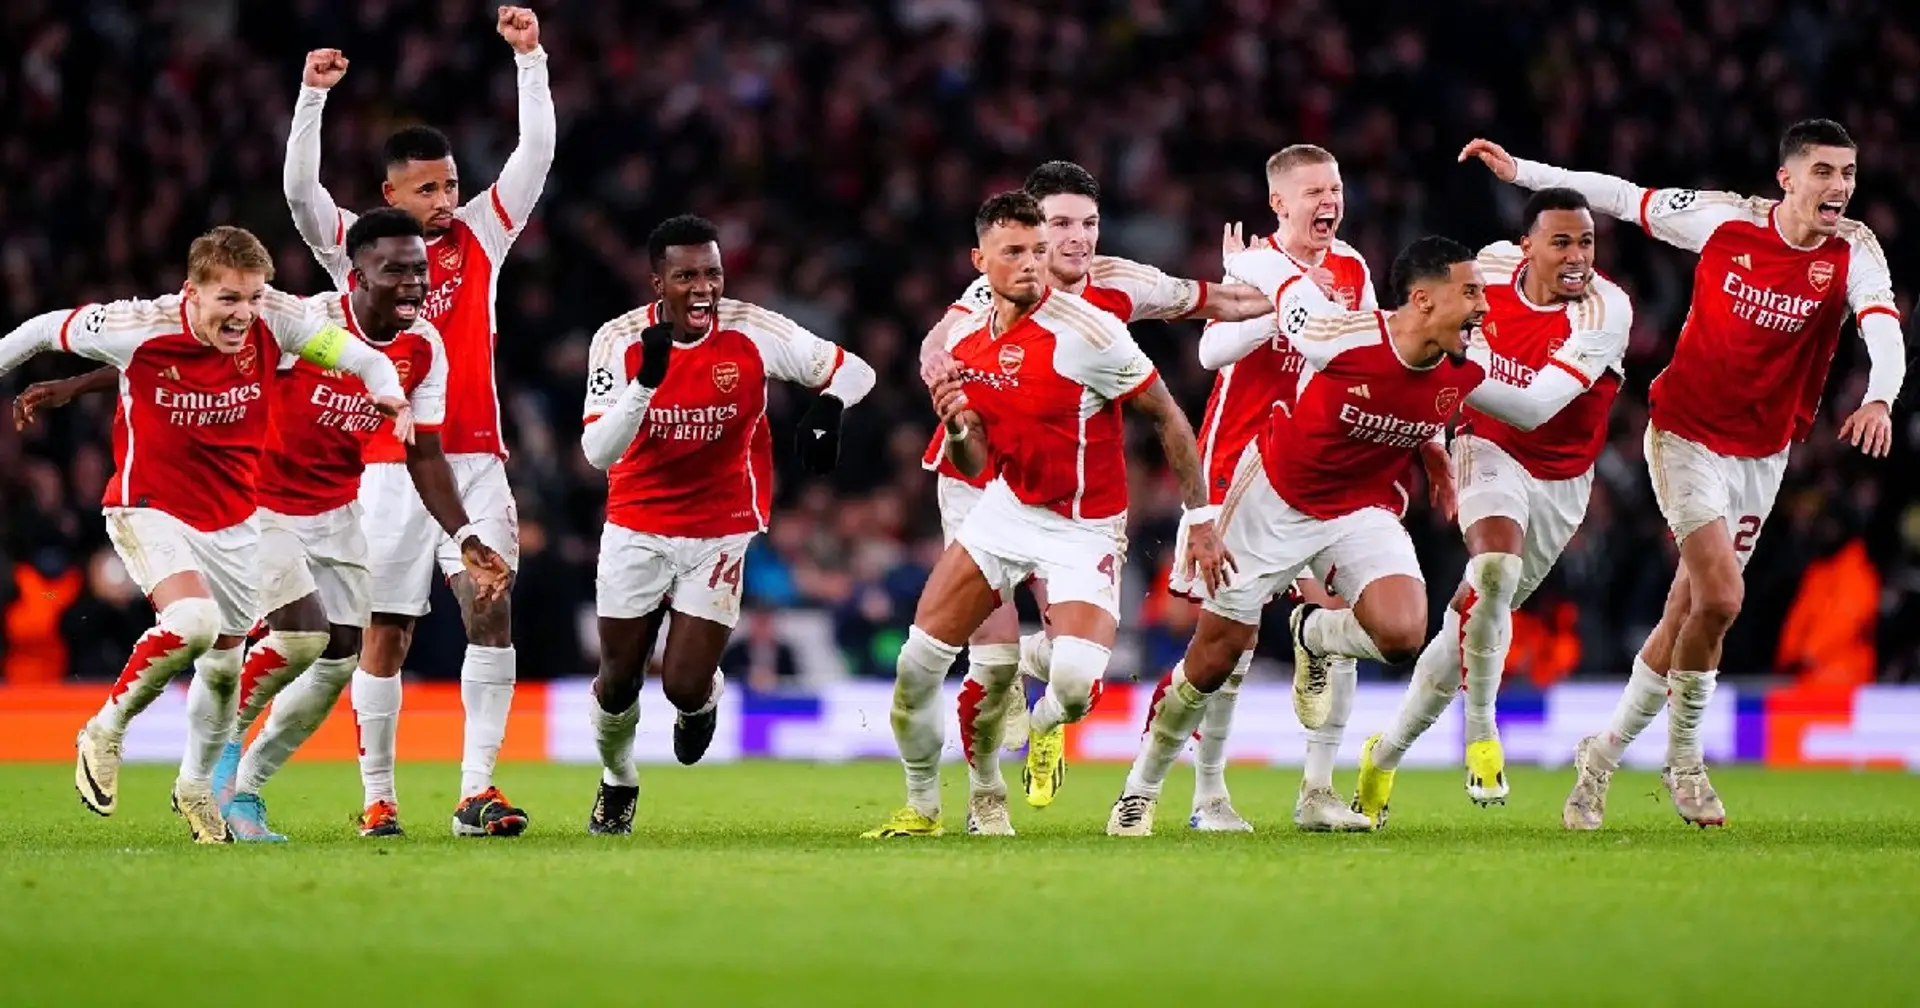 Arsenal march on in Champions League & 2 more big stories you might've missed